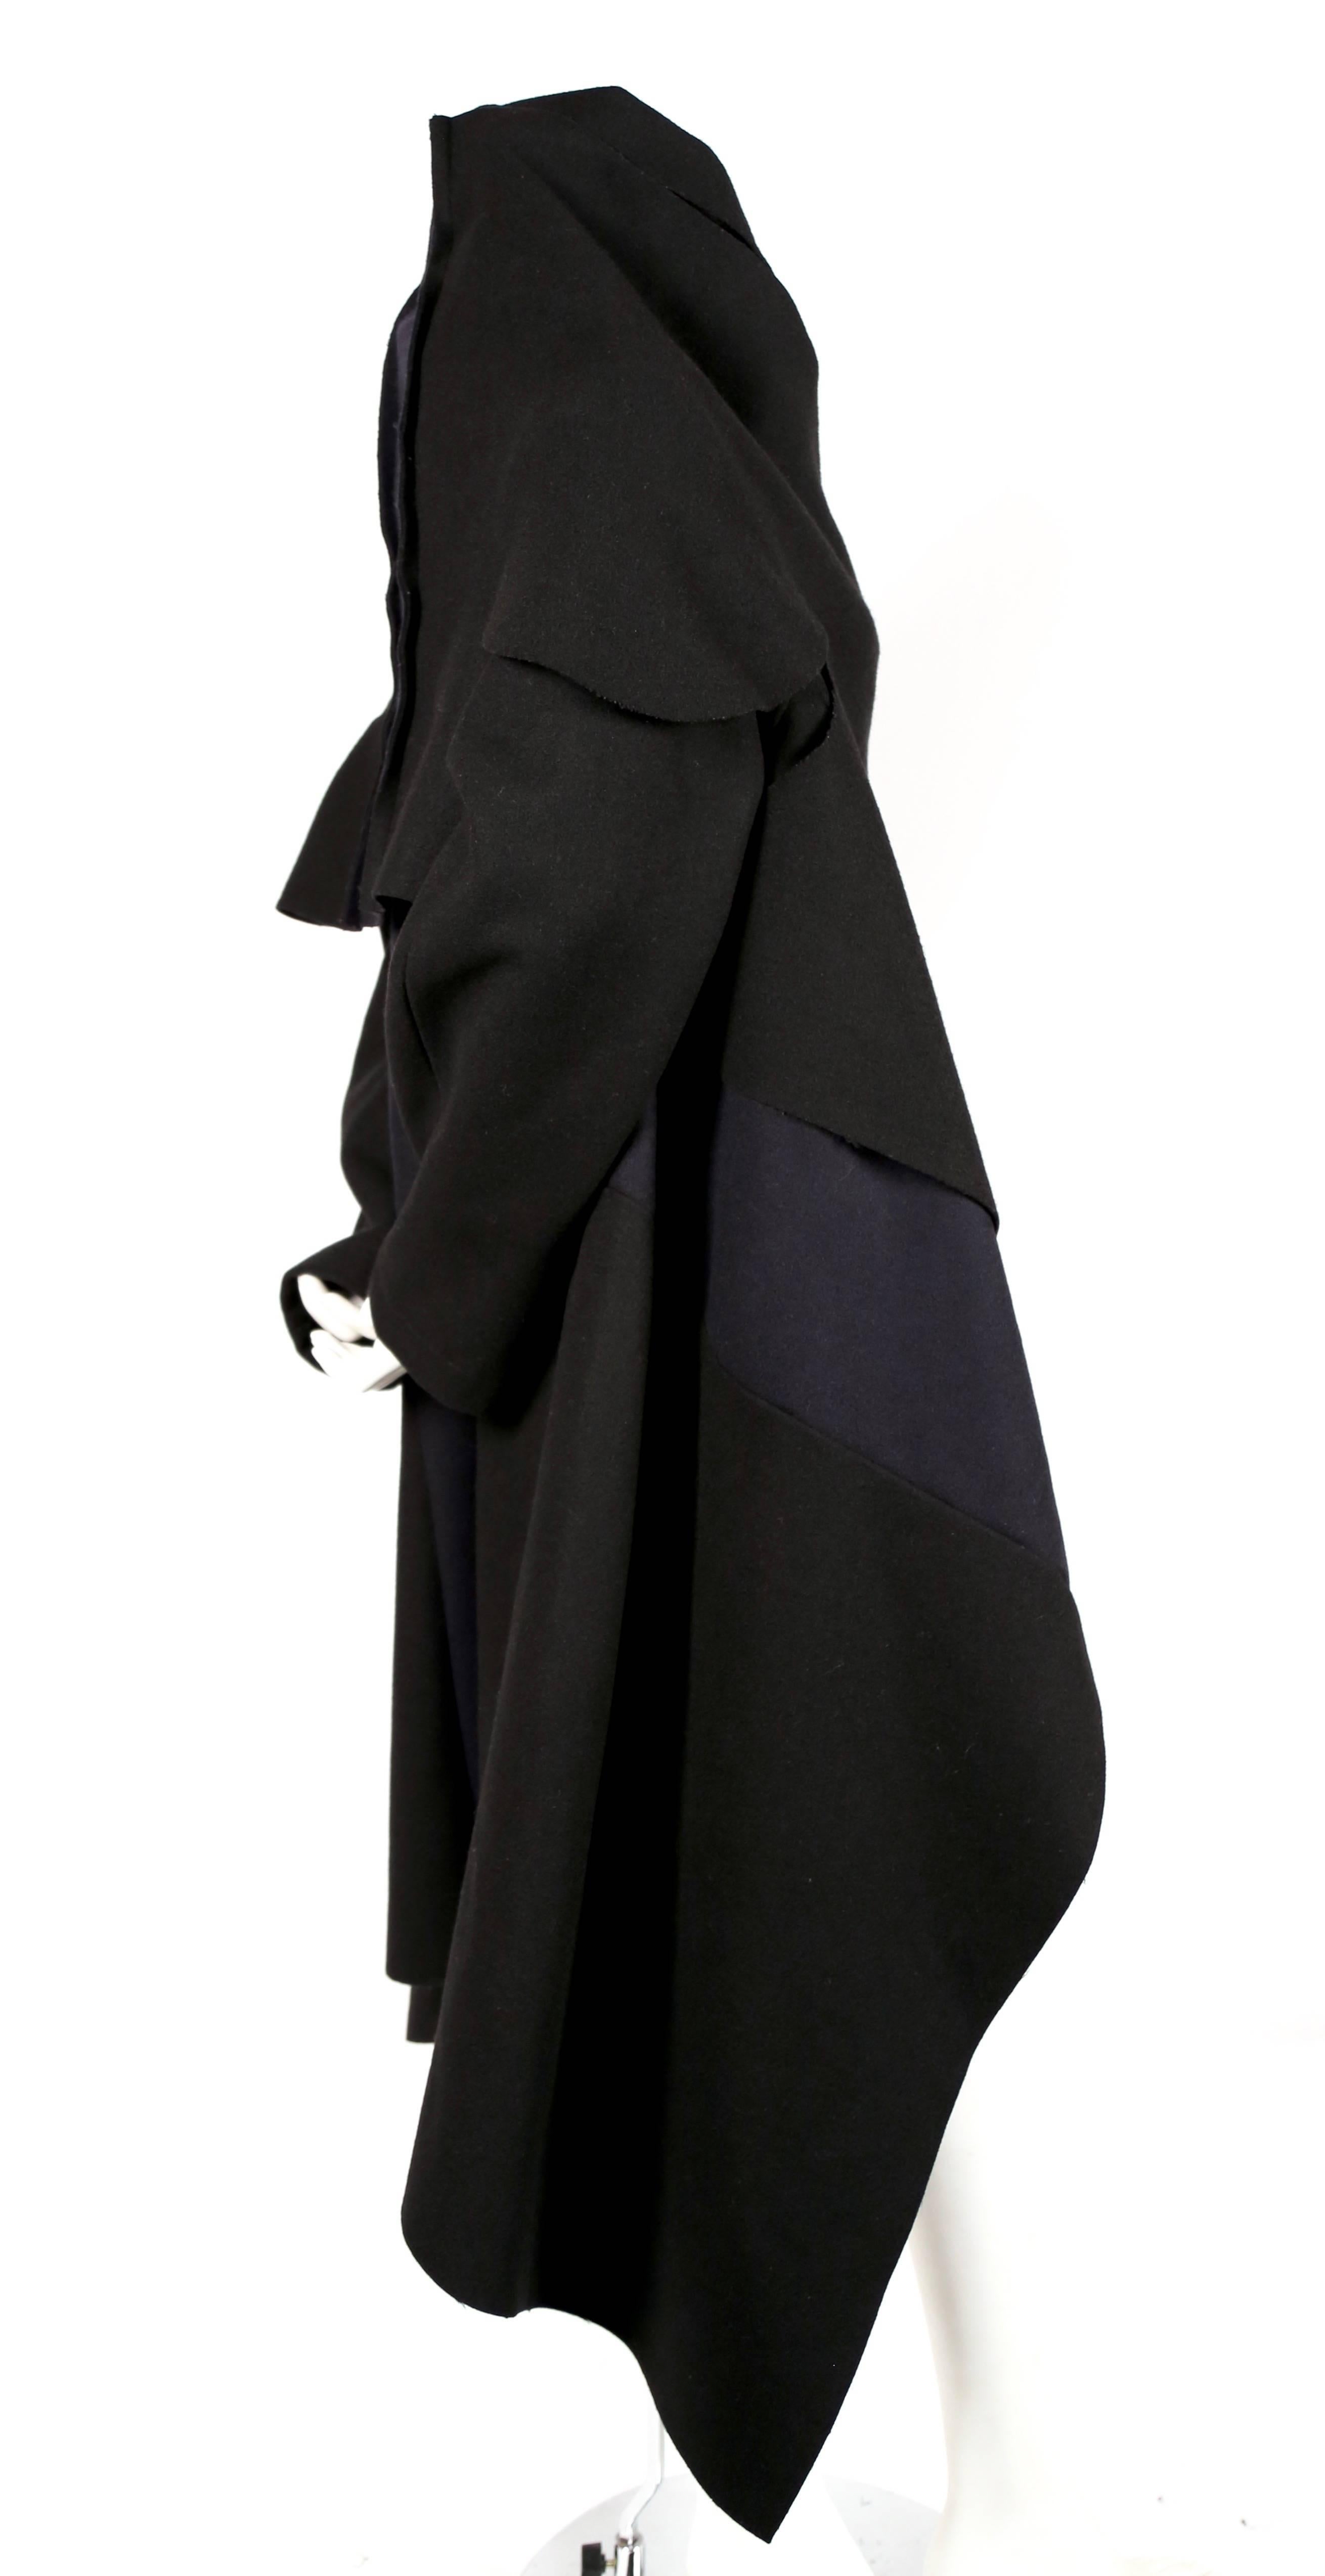 Jet black and navy blue felted wool patchwork coat with draped neckline designed by Comme Des Garcons dating to fall of 2003. Great transitional piece. Can be worn a number of ways. No size indicated. Due to the oversized cut and lack of closures